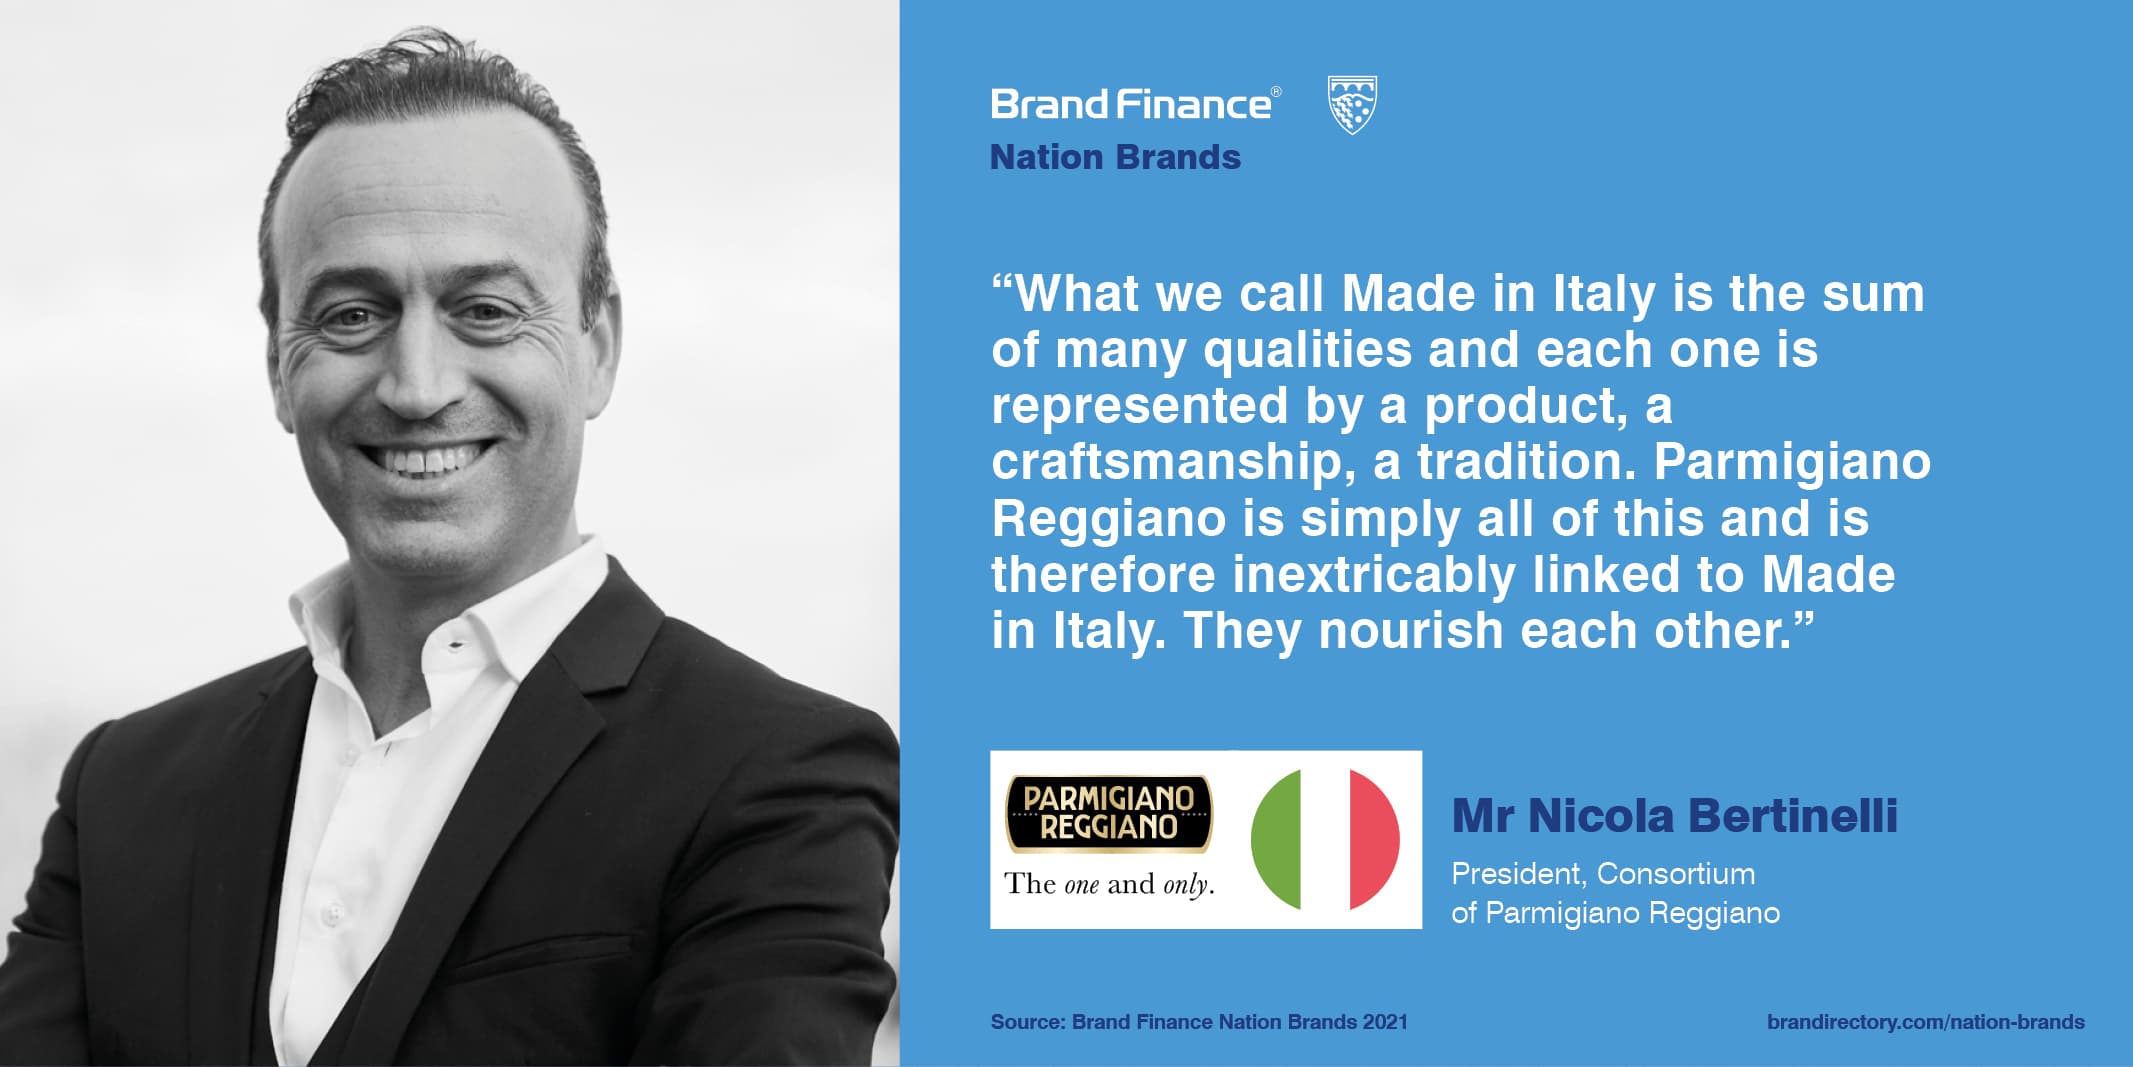  Nicola Bertinelli, President, Consortium of Parmigiano Reggiano discusses what Made in Italy really stands for